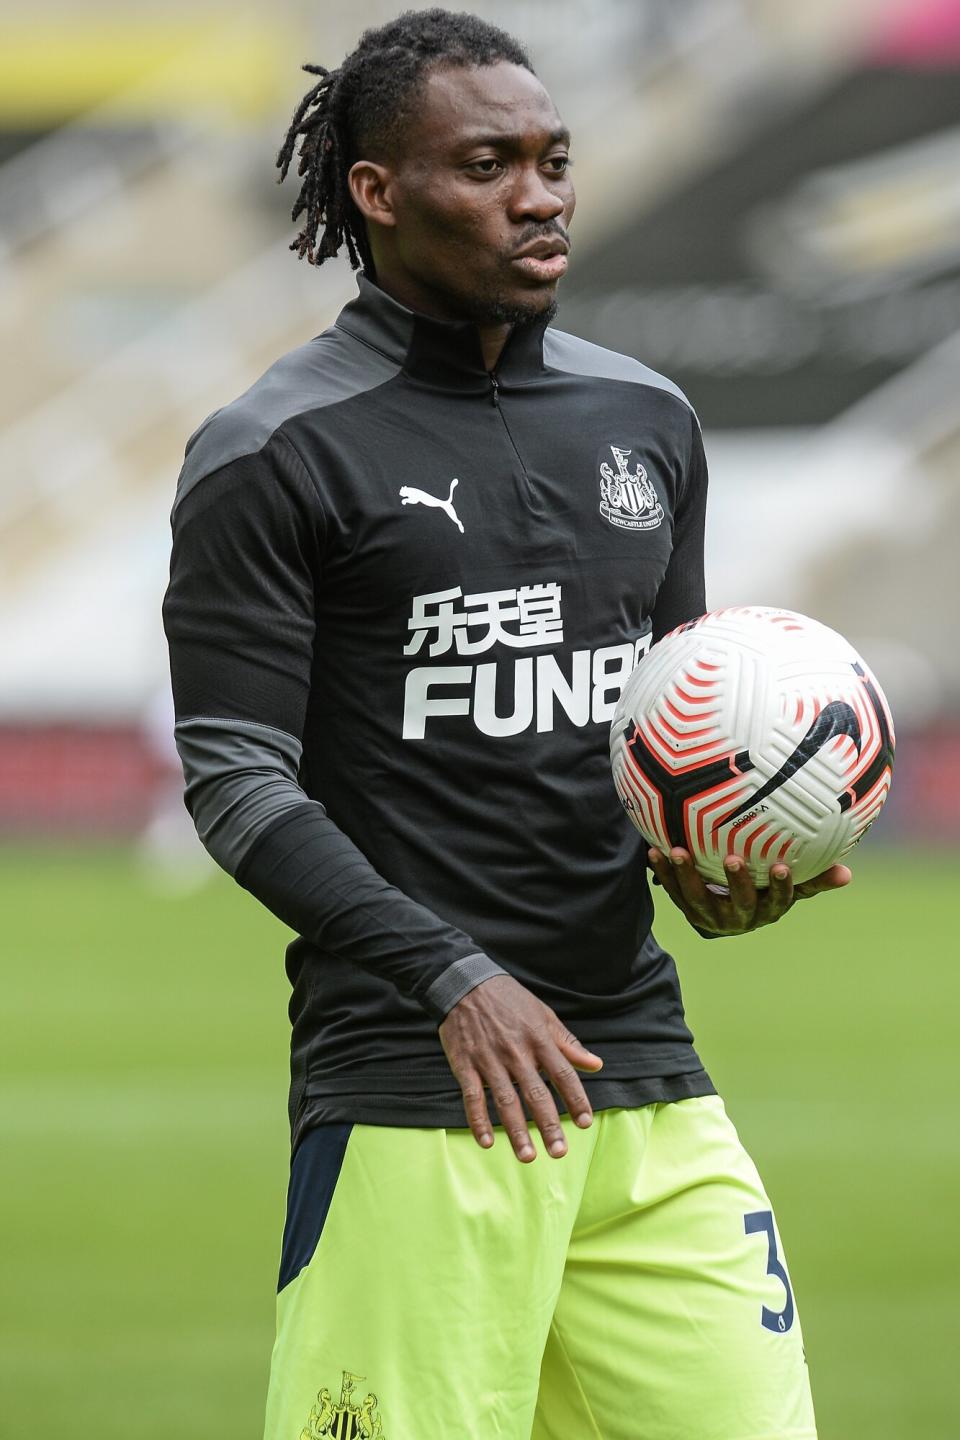 Christian Atsu of Newcastle United FC (30) holds a ball in his hand during the Pre Season Friendly between Newcastle United and Stoke City at St James' Park on September 05, 2020 in Newcastle upon Tyne, England.